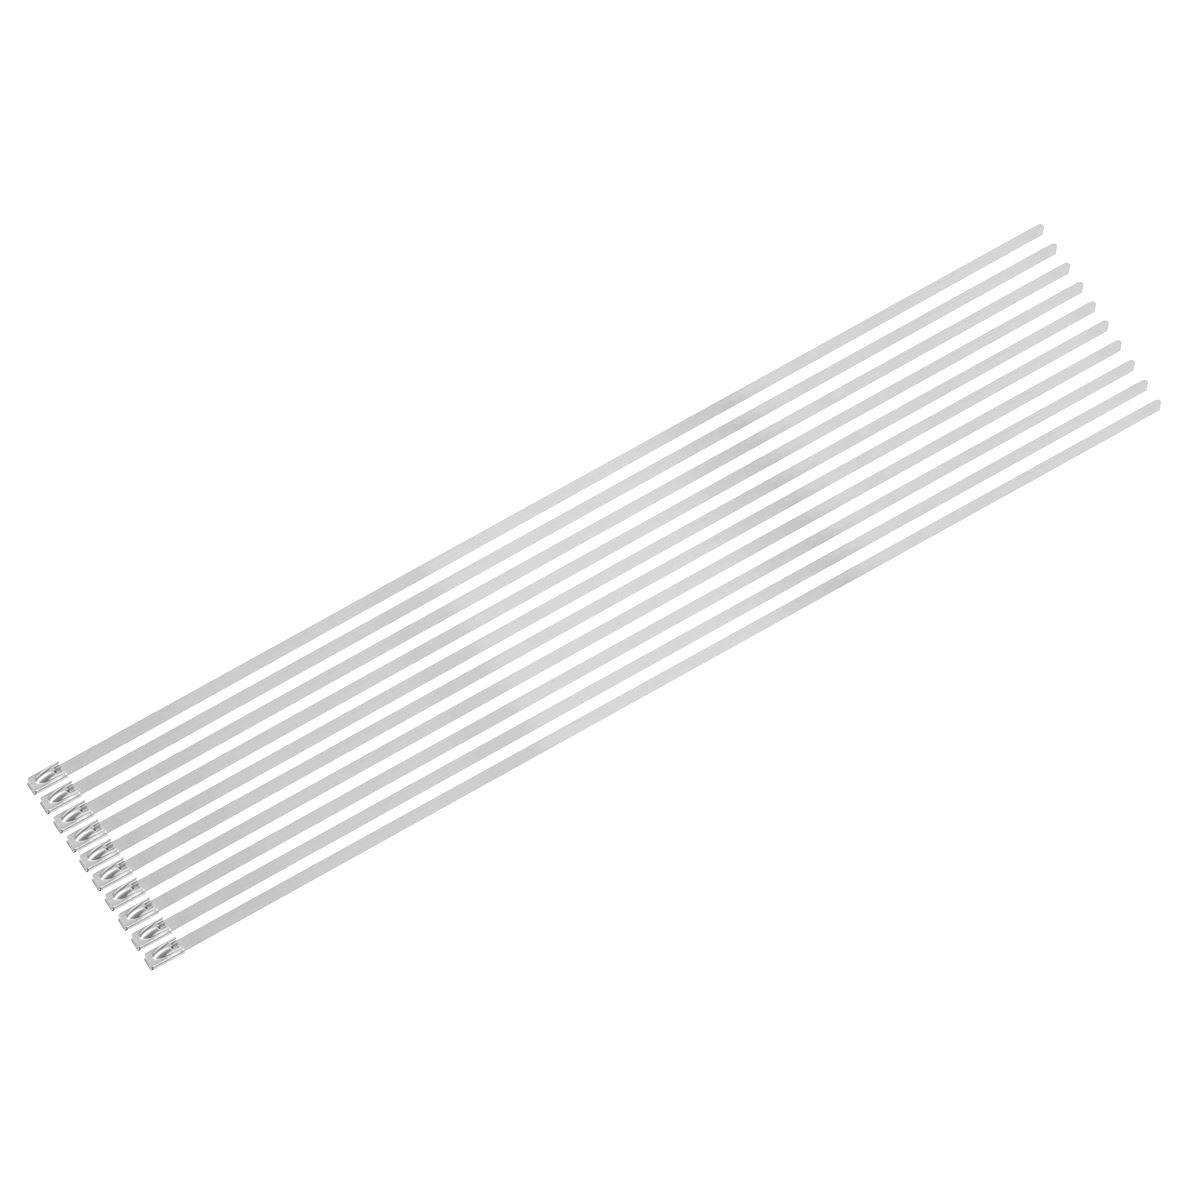 Sealey Stainless Steel Cable Tie 400mm x 4.6mm - Pack of 100